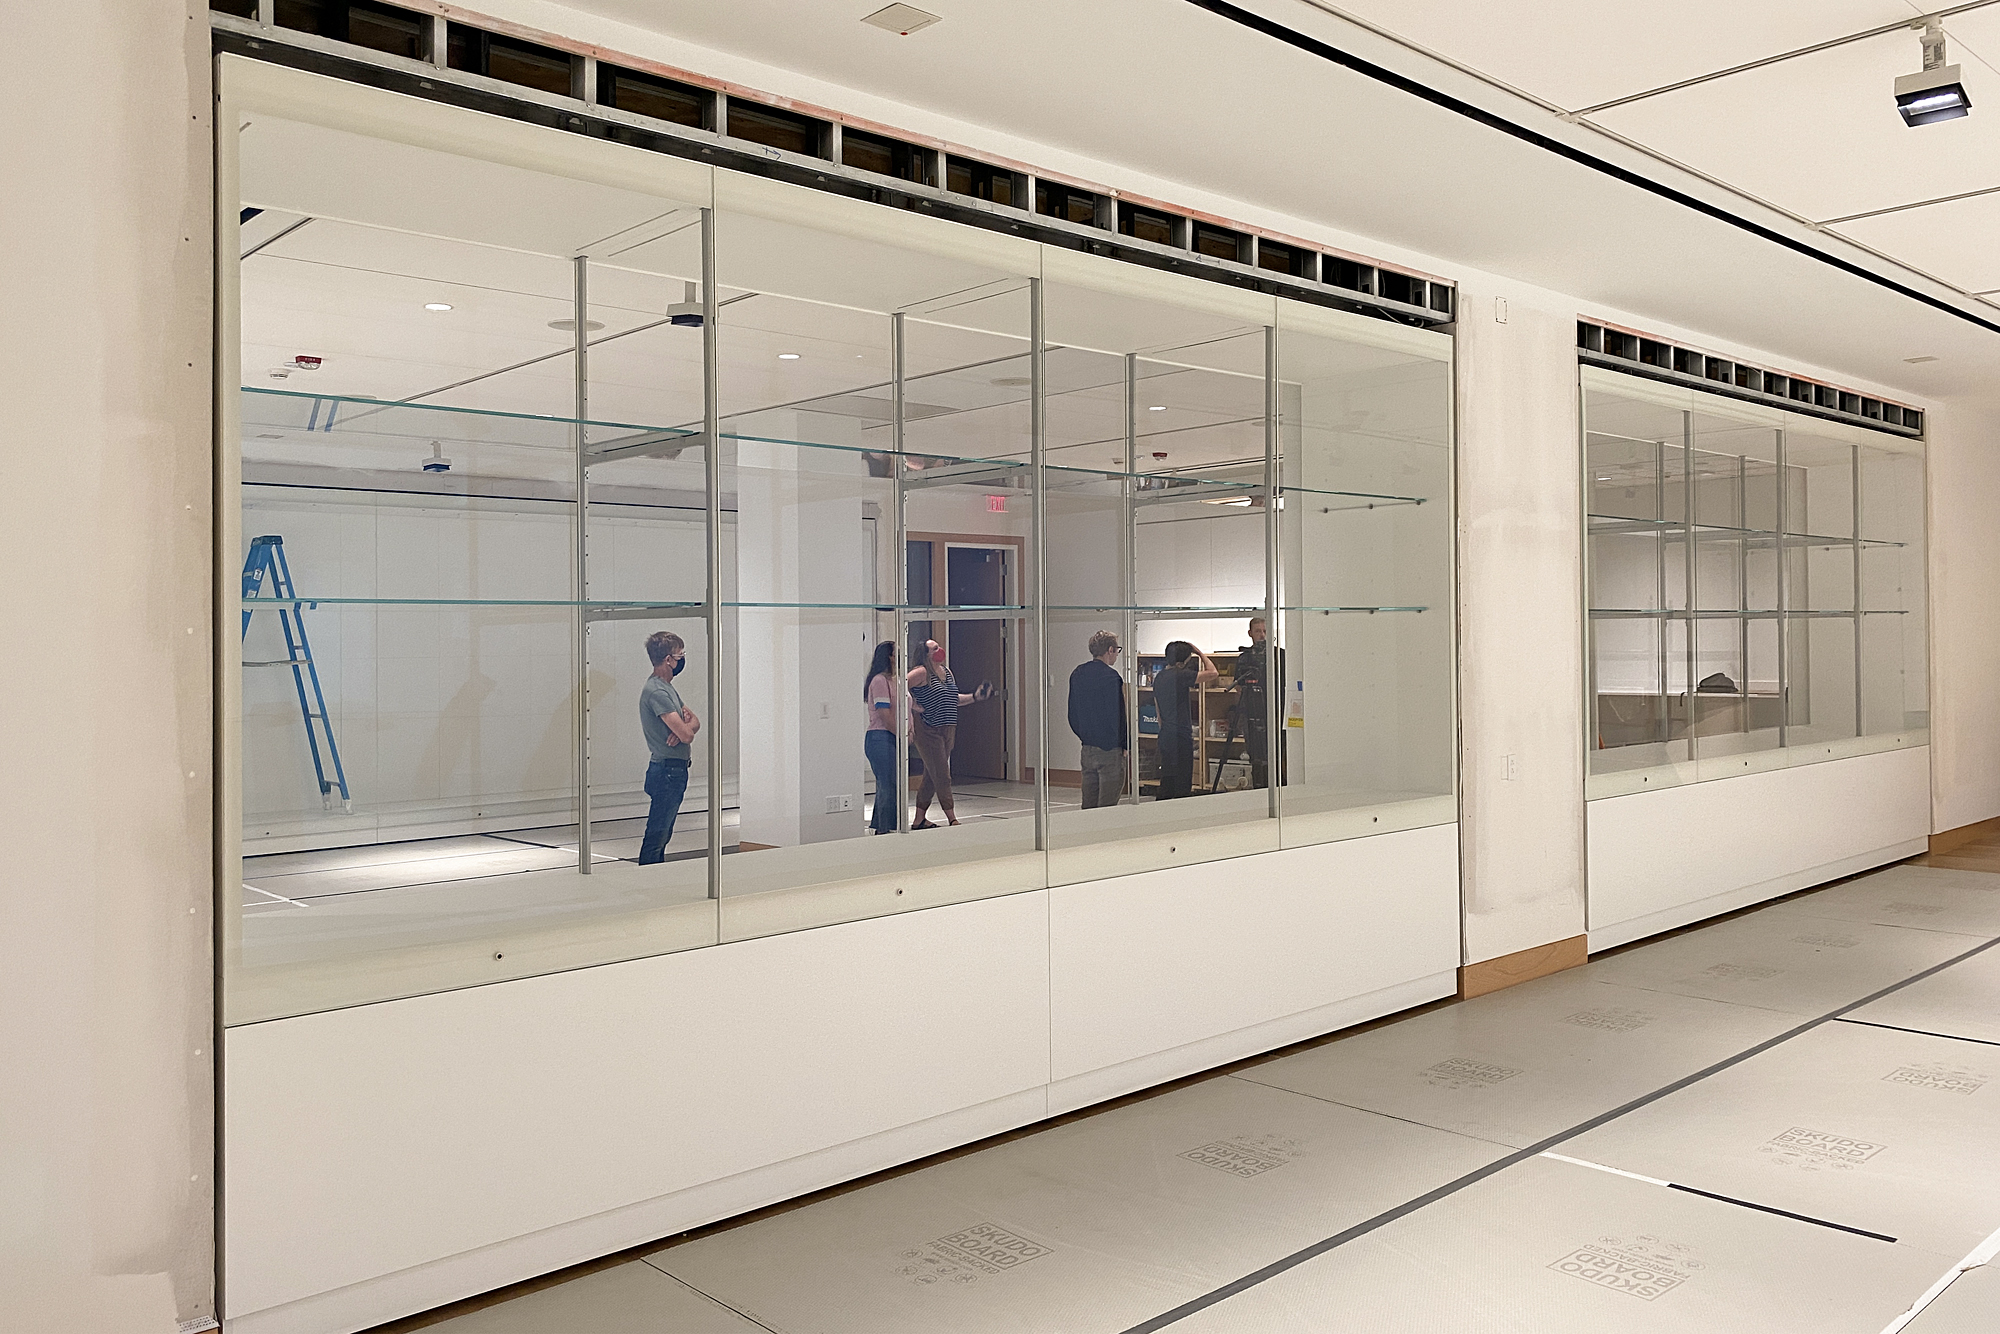 A wall of glass cases separates two bright white rooms with people gathered on the other side of the cases